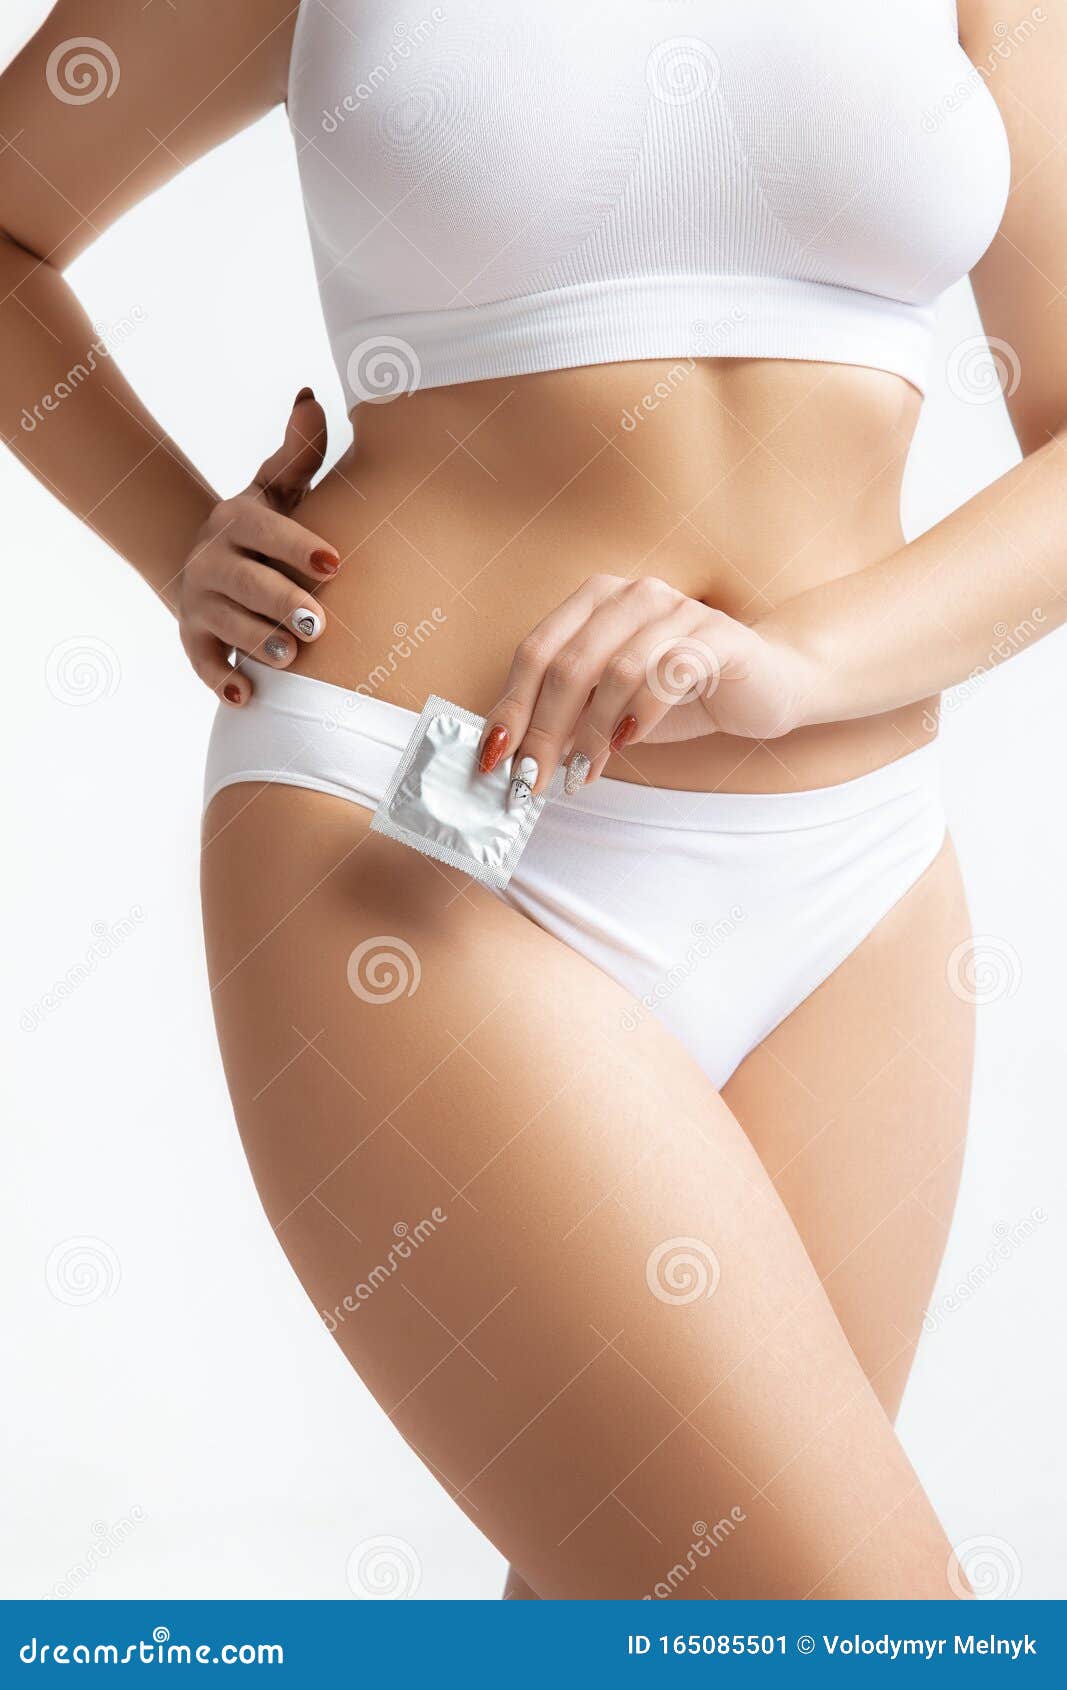 https://thumbs.dreamstime.com/z/beautiful-female-body-concept-bodycare-lifting-underwear-isolated-white-background-correction-surgery-beauty-perfect-165085501.jpg